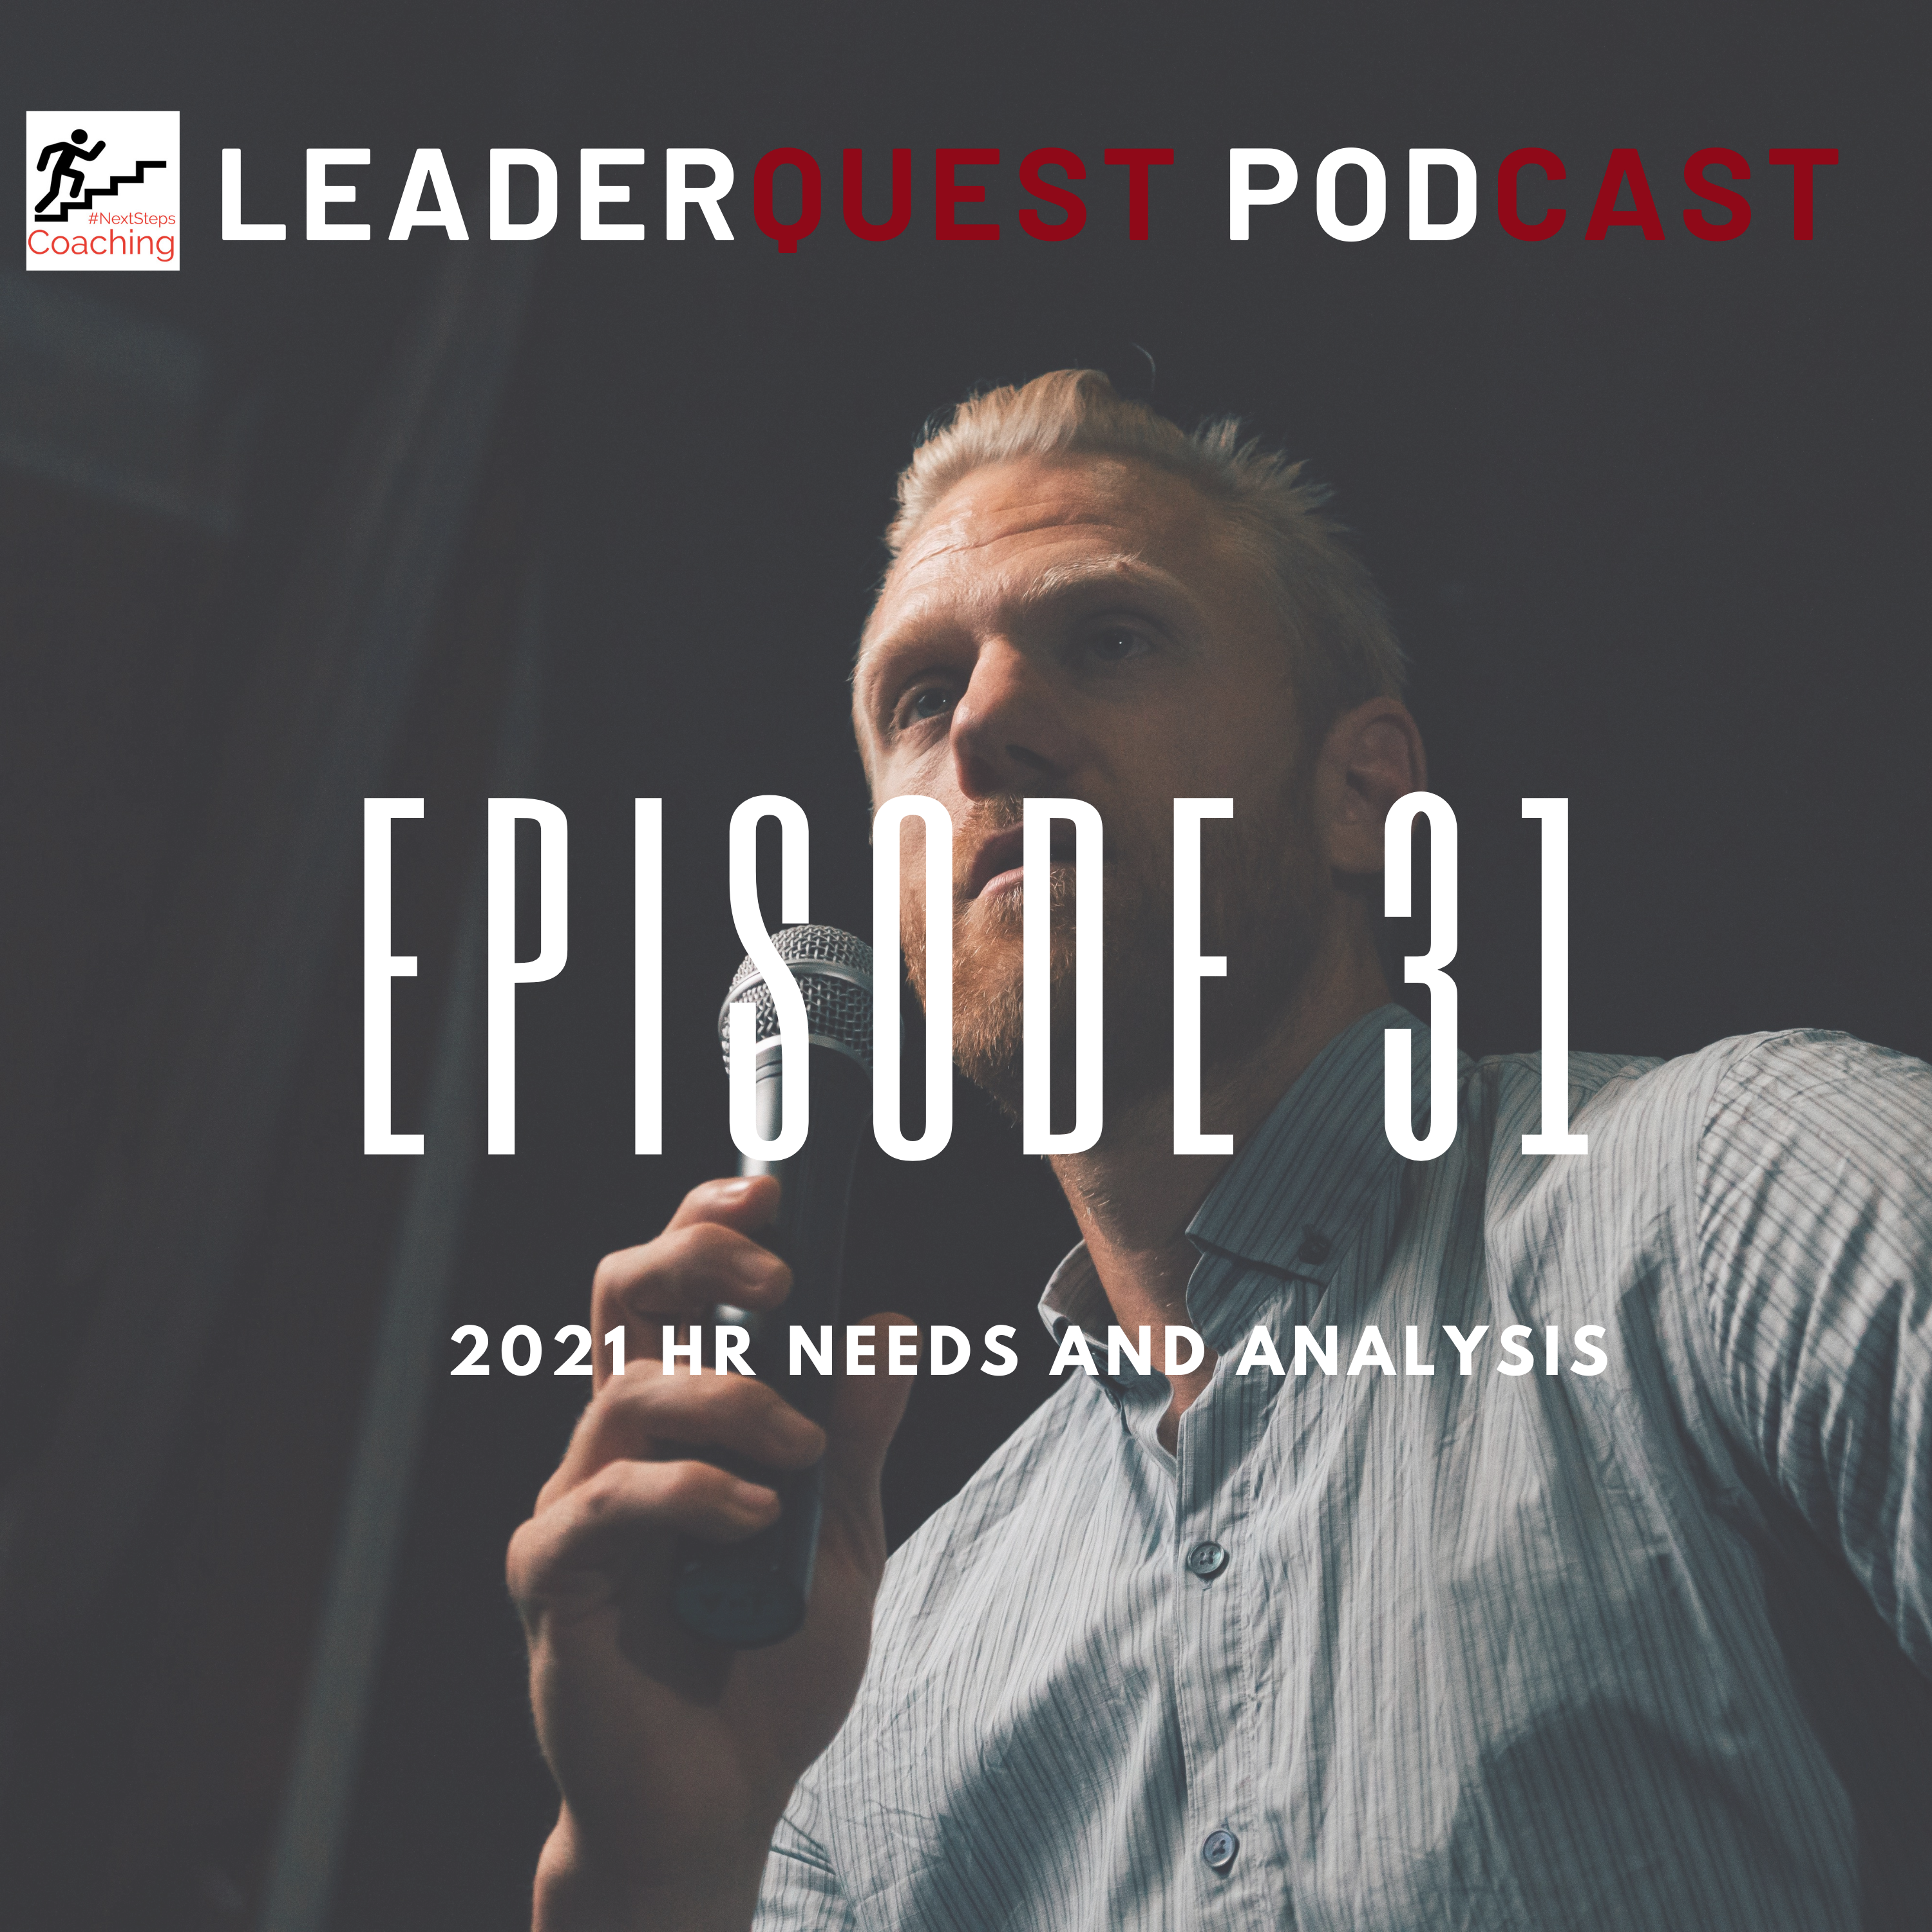 LeaderQuest Podcast Cover Art: Episode 31 and your HR Needs in 2021